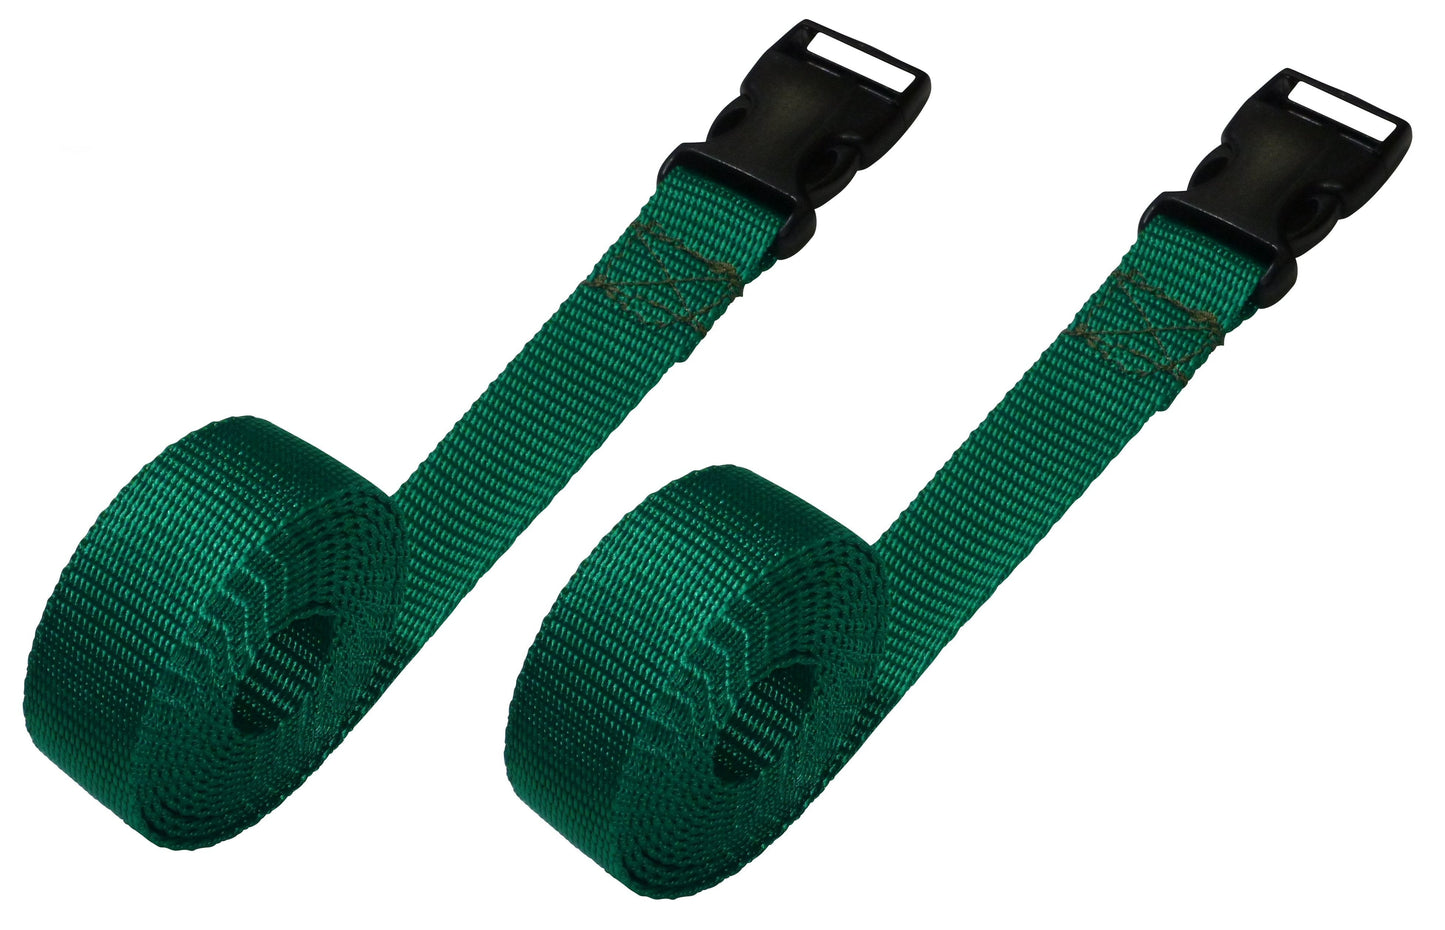 Benristraps 2 Pack Webbing Straps with Clips - Adjustable Luggage Straps in emerald